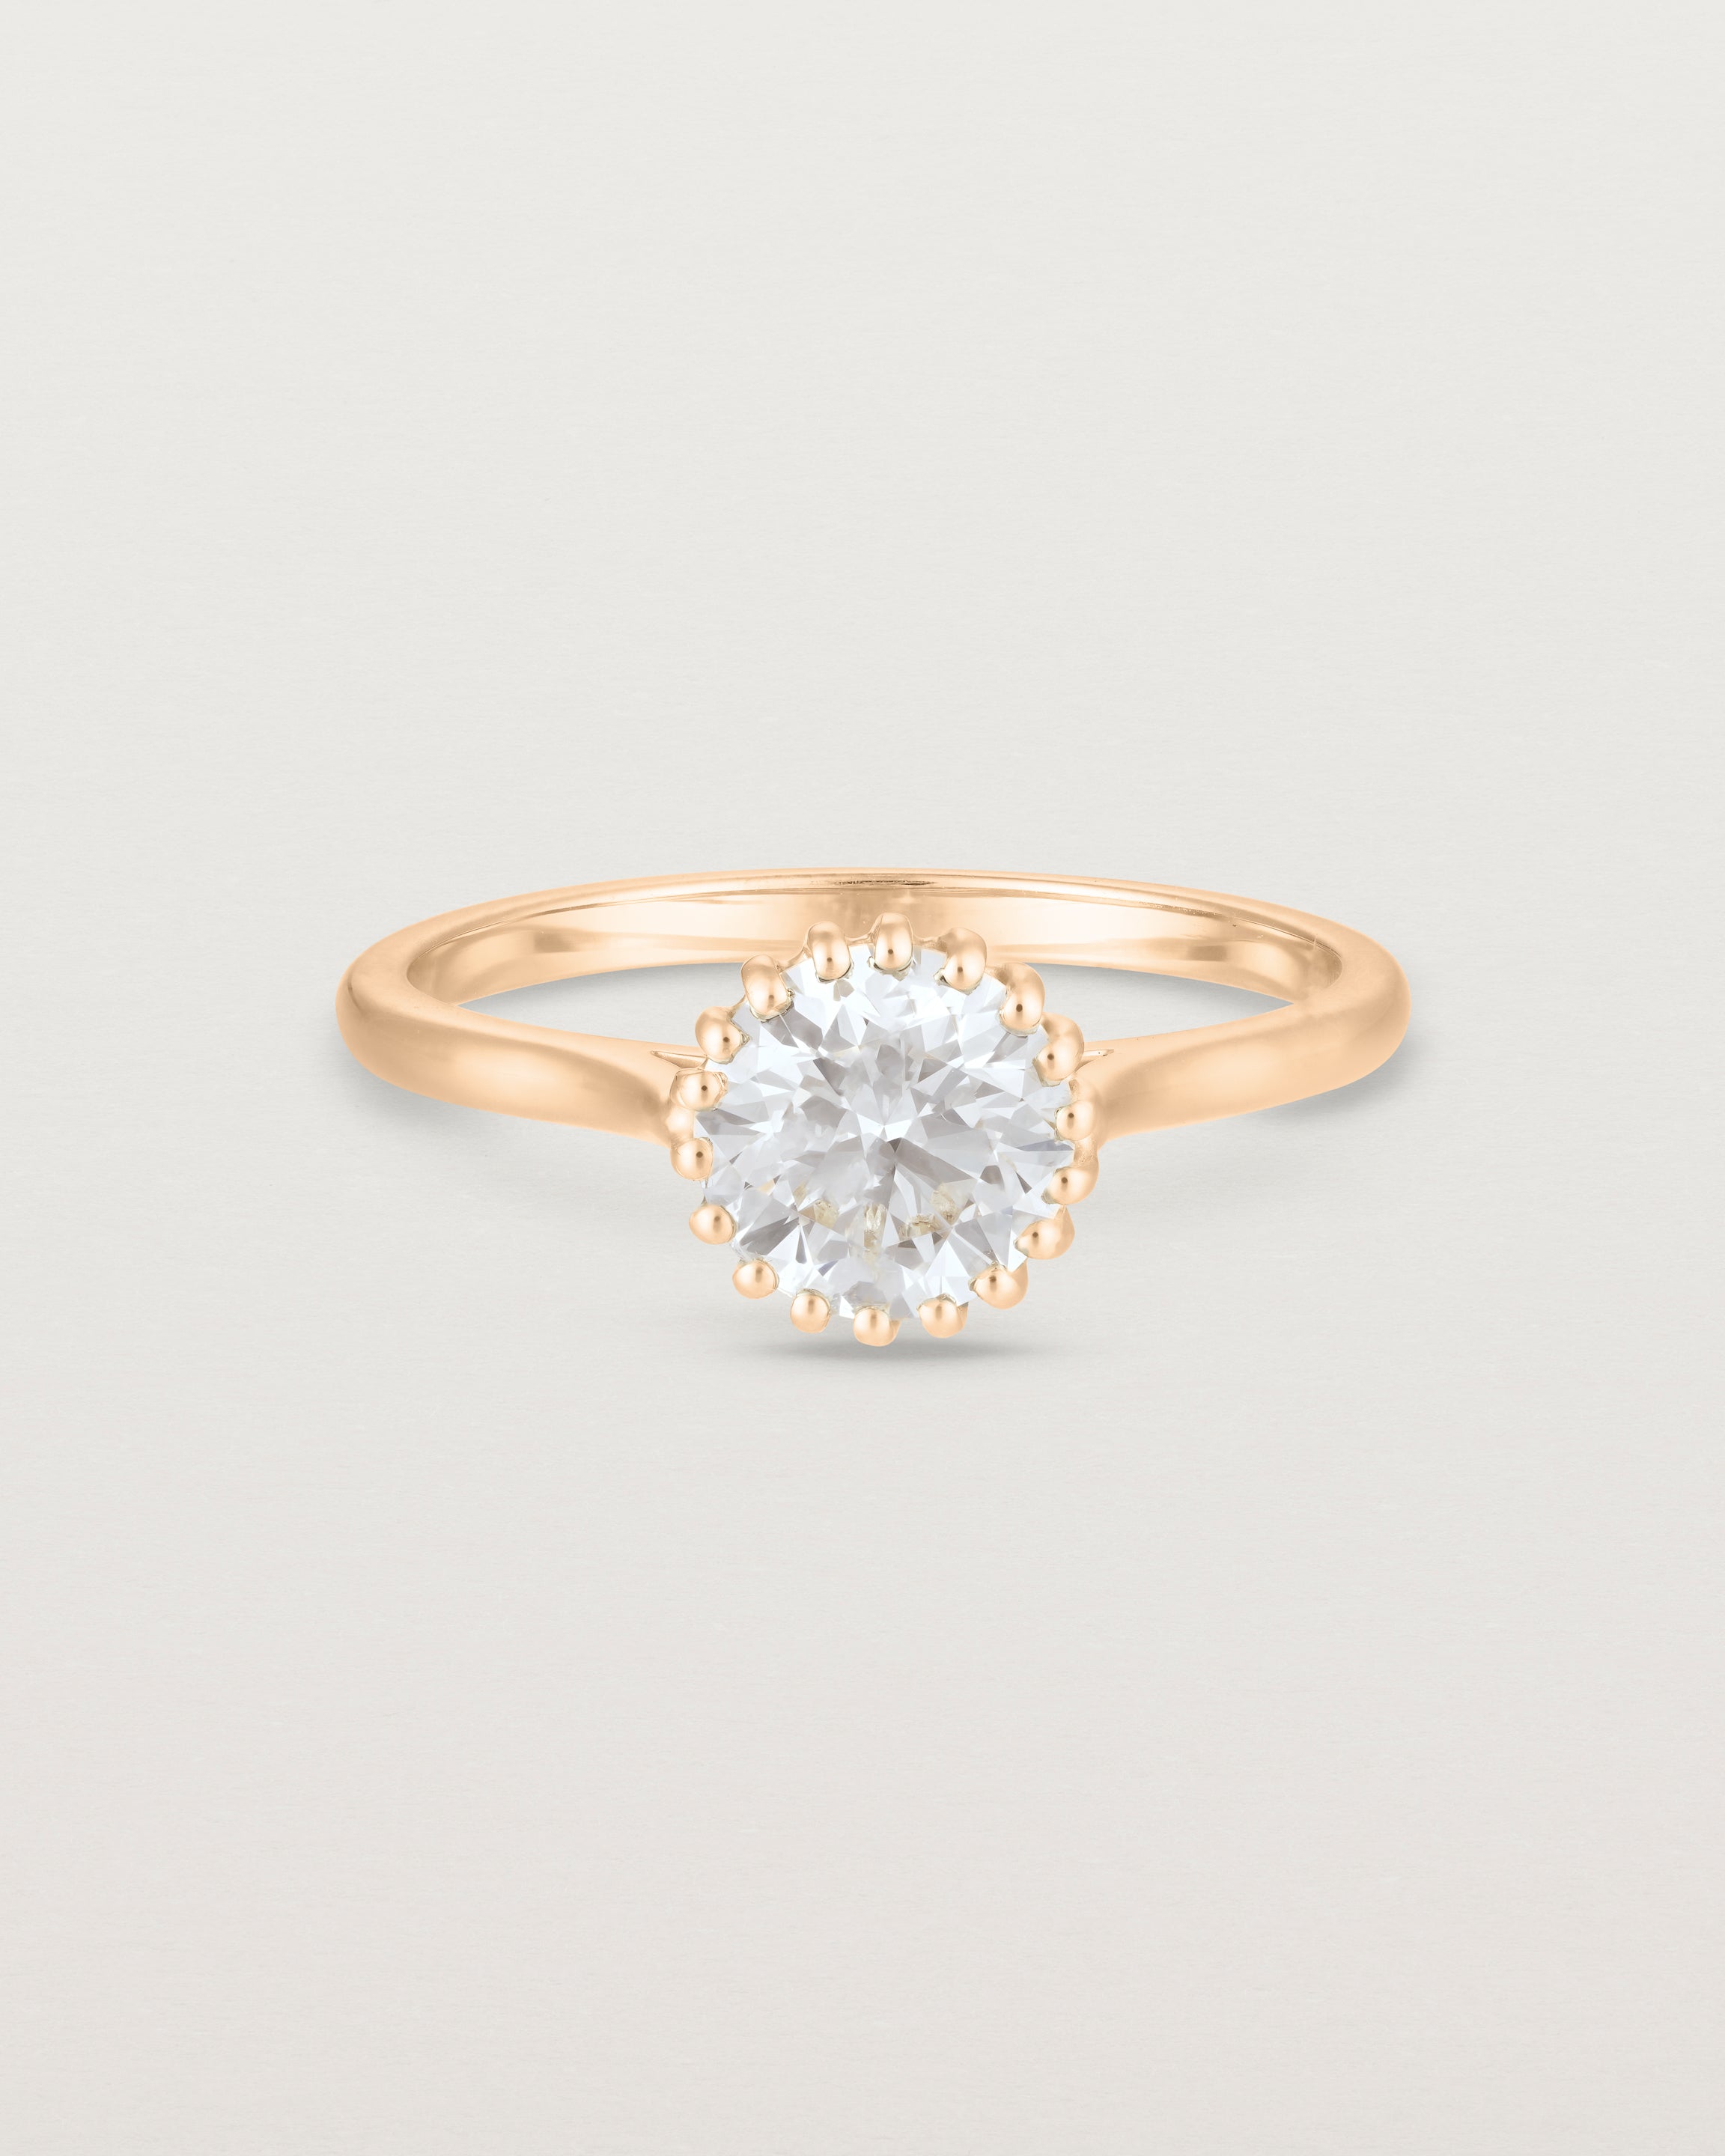 Front view of the Meroë Round Solitaire | Laboratory Grown Diamond in rose gold.